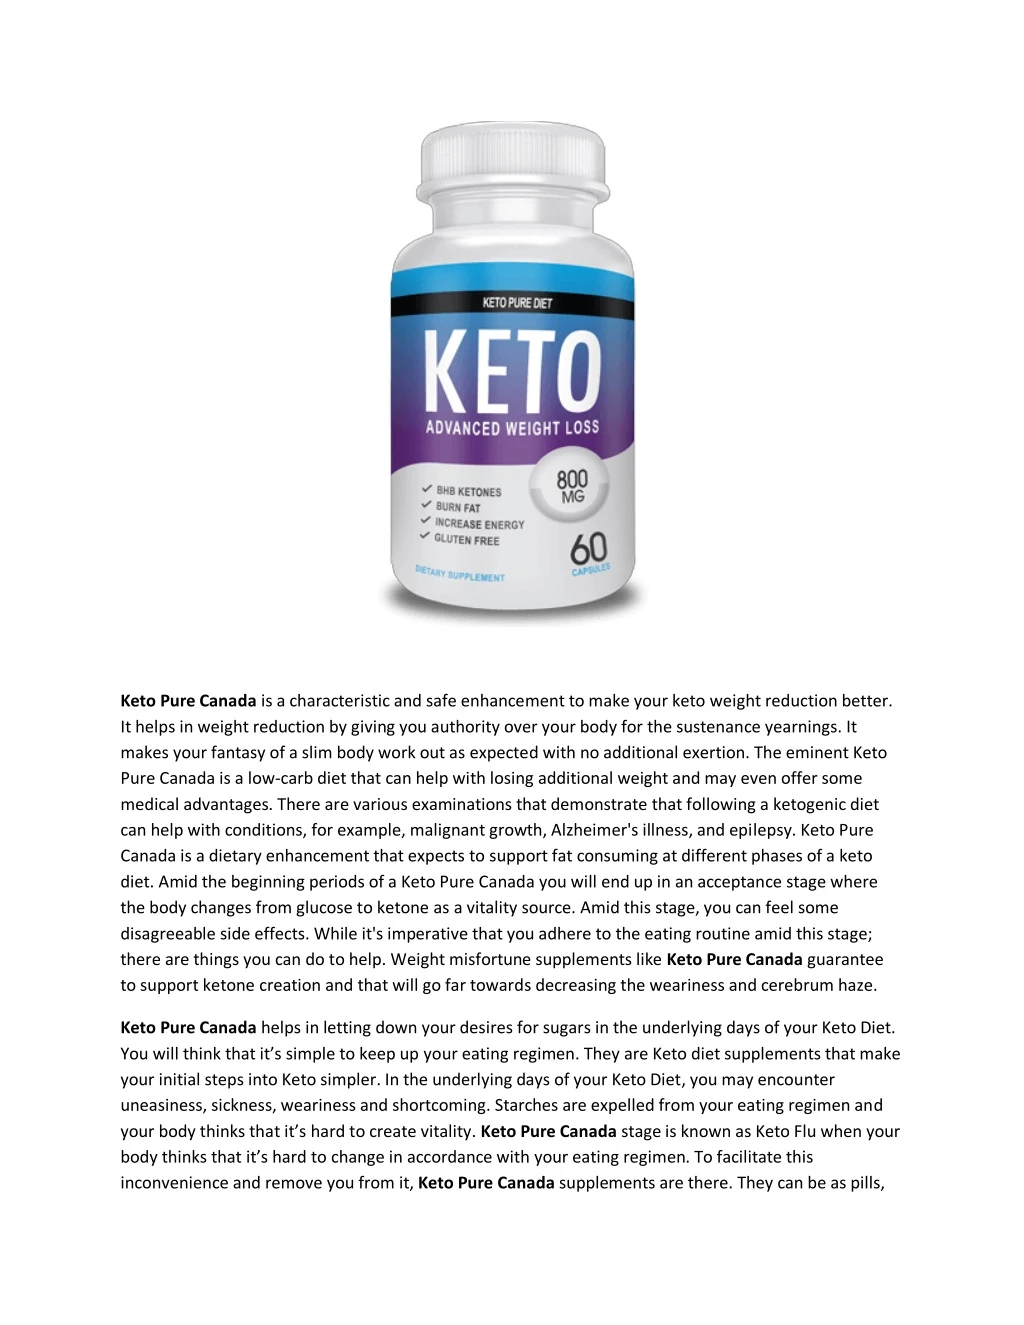 keto pure canada is a characteristic and safe